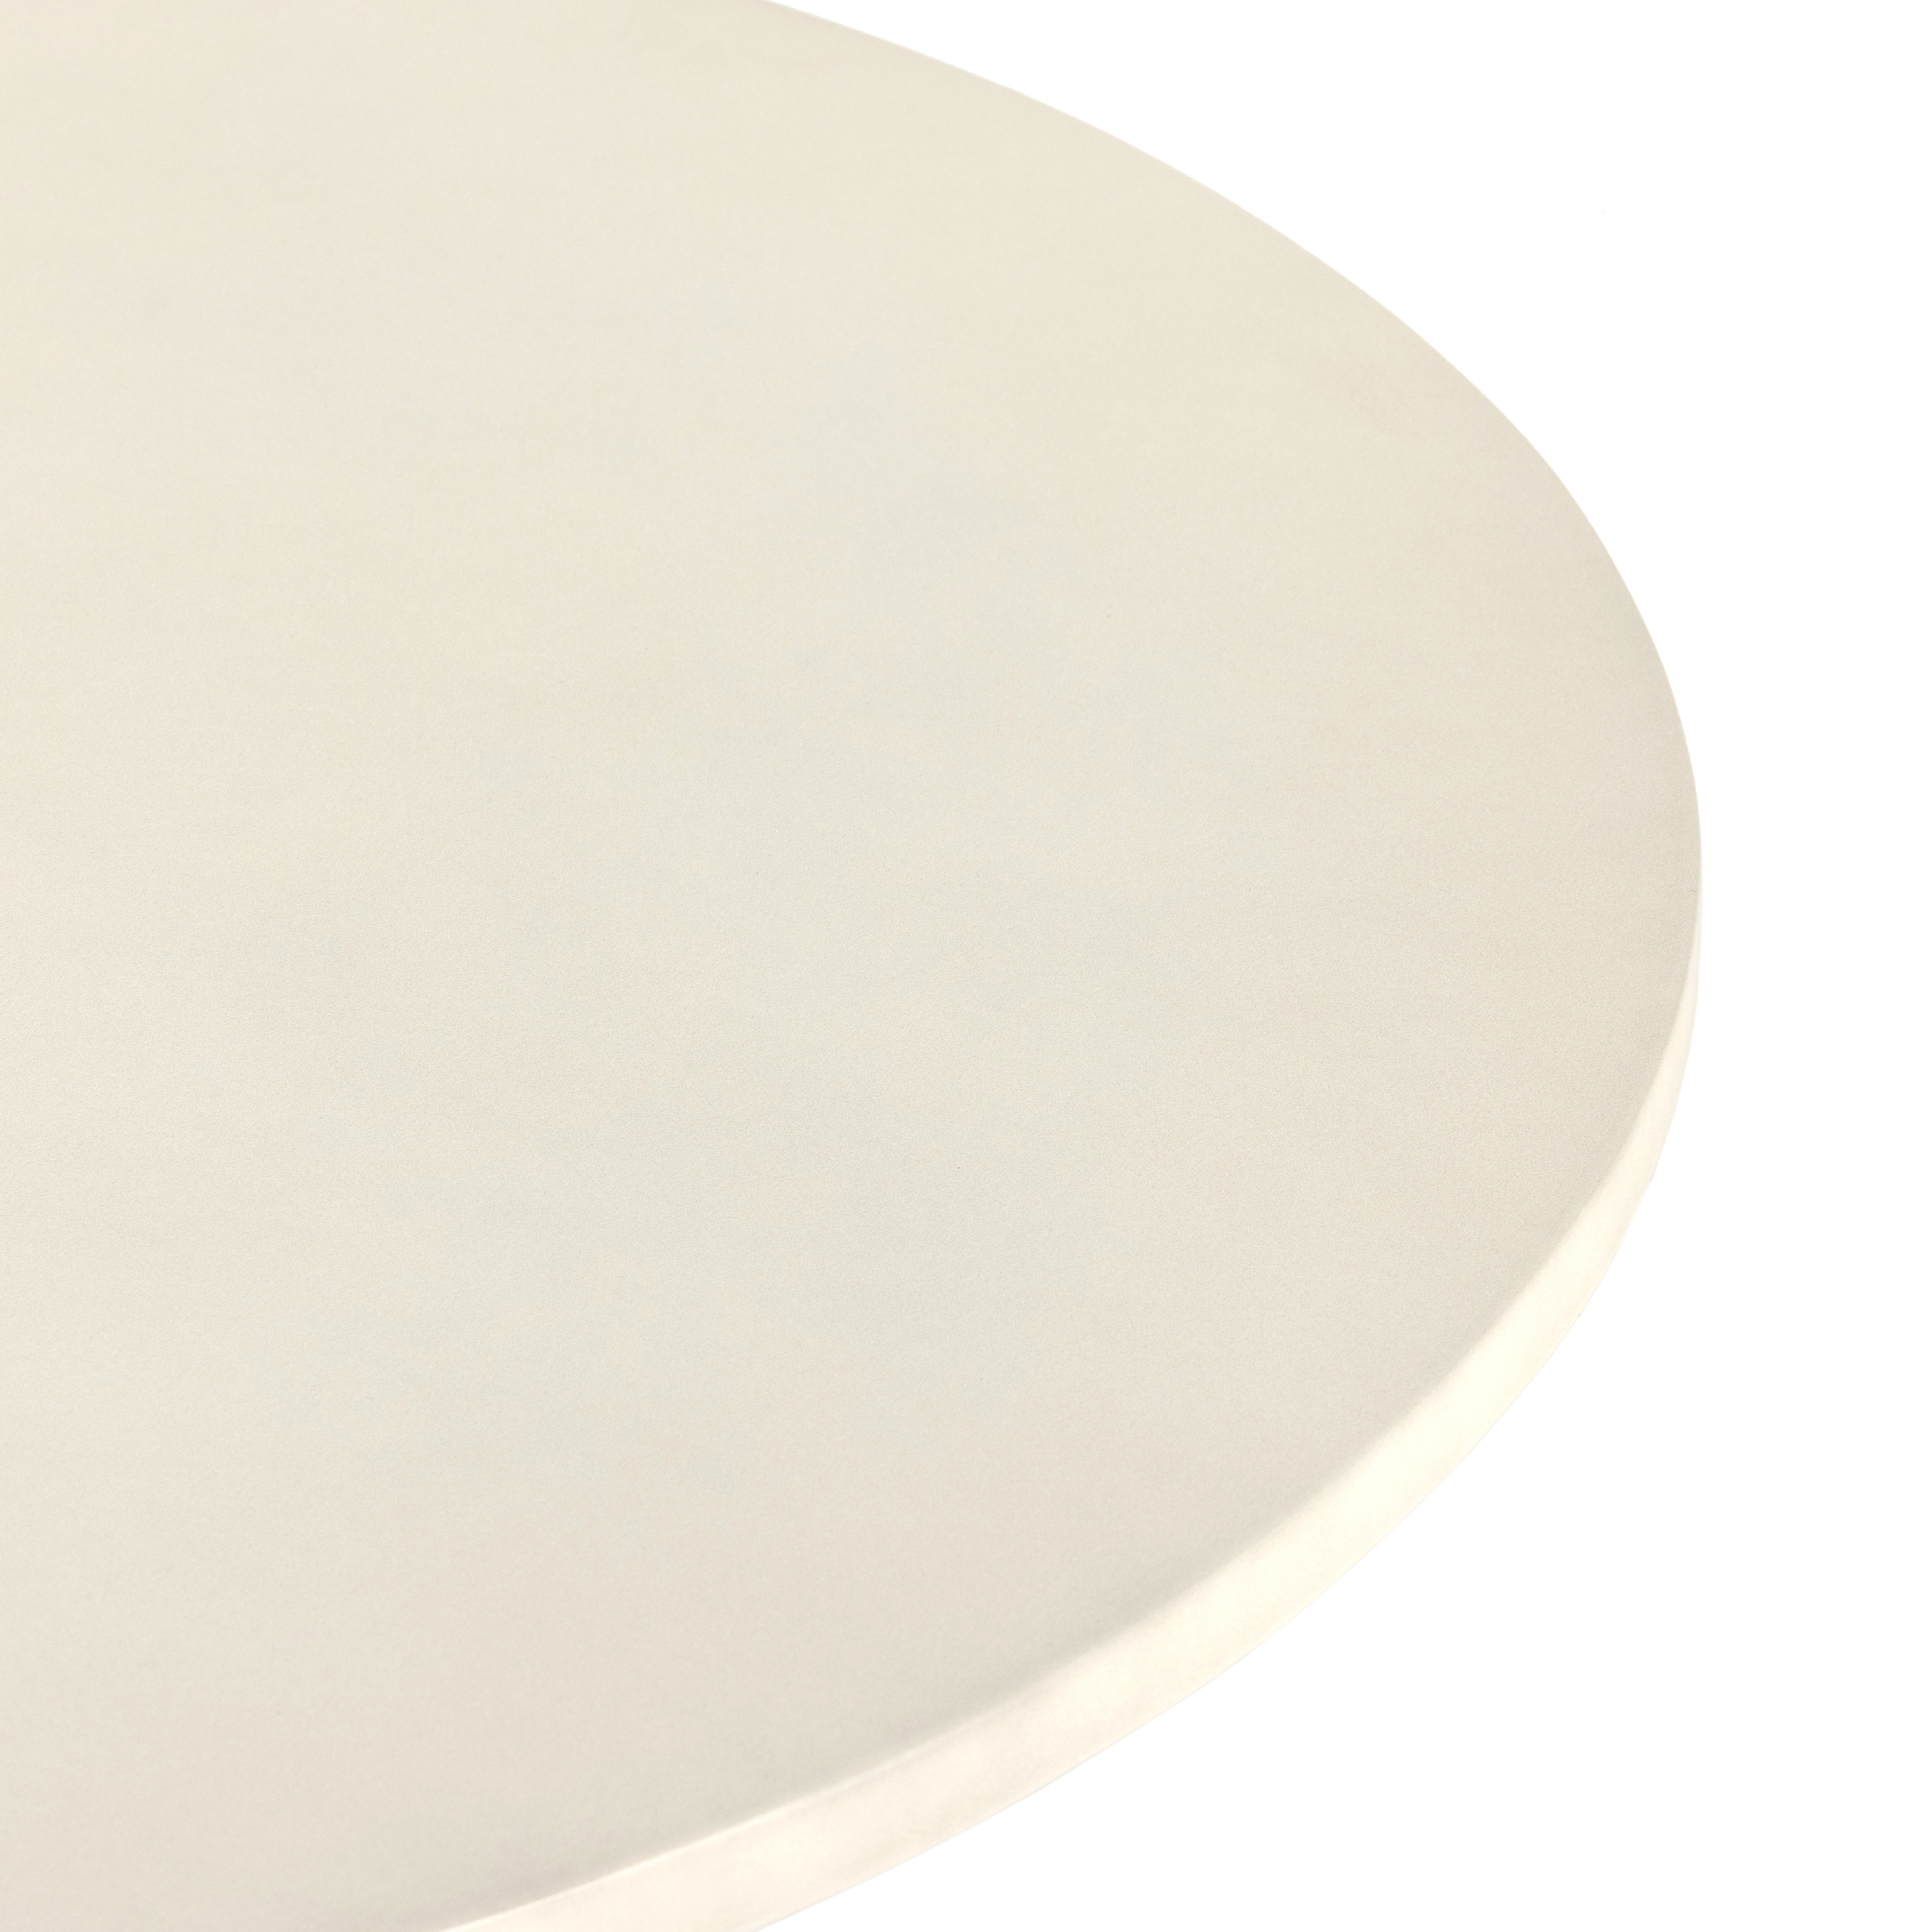 Bowman Outdoor Coffee Table-White Cncrt - Image 6